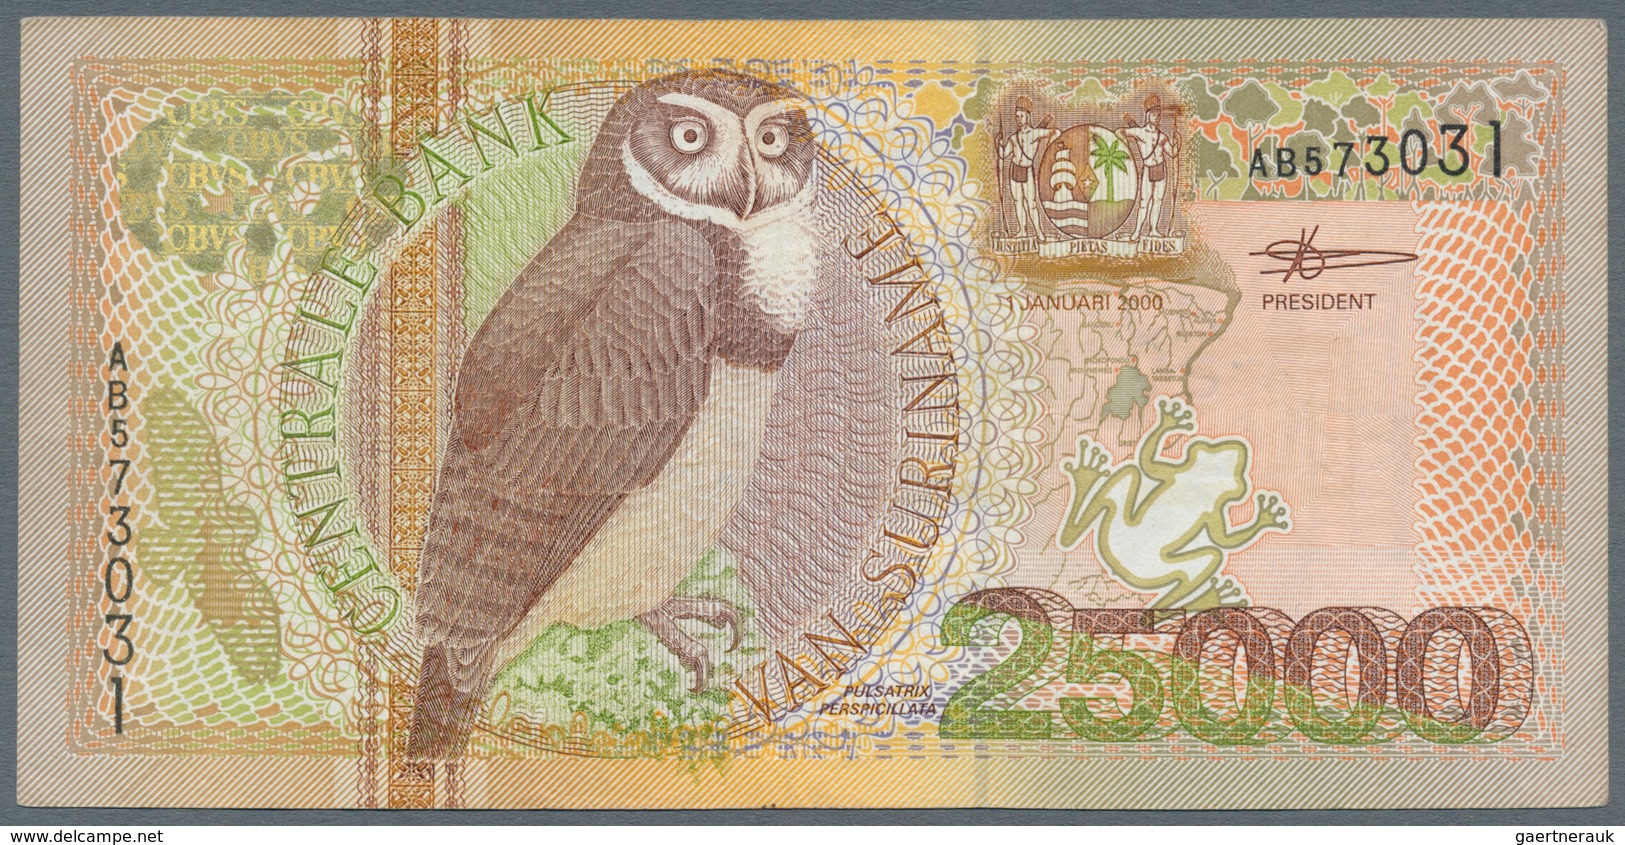 Suriname: 25.000 Gulden 2000, P.154, Nice Item With Several Folds And Minor Spots, But Still Strong - Surinam